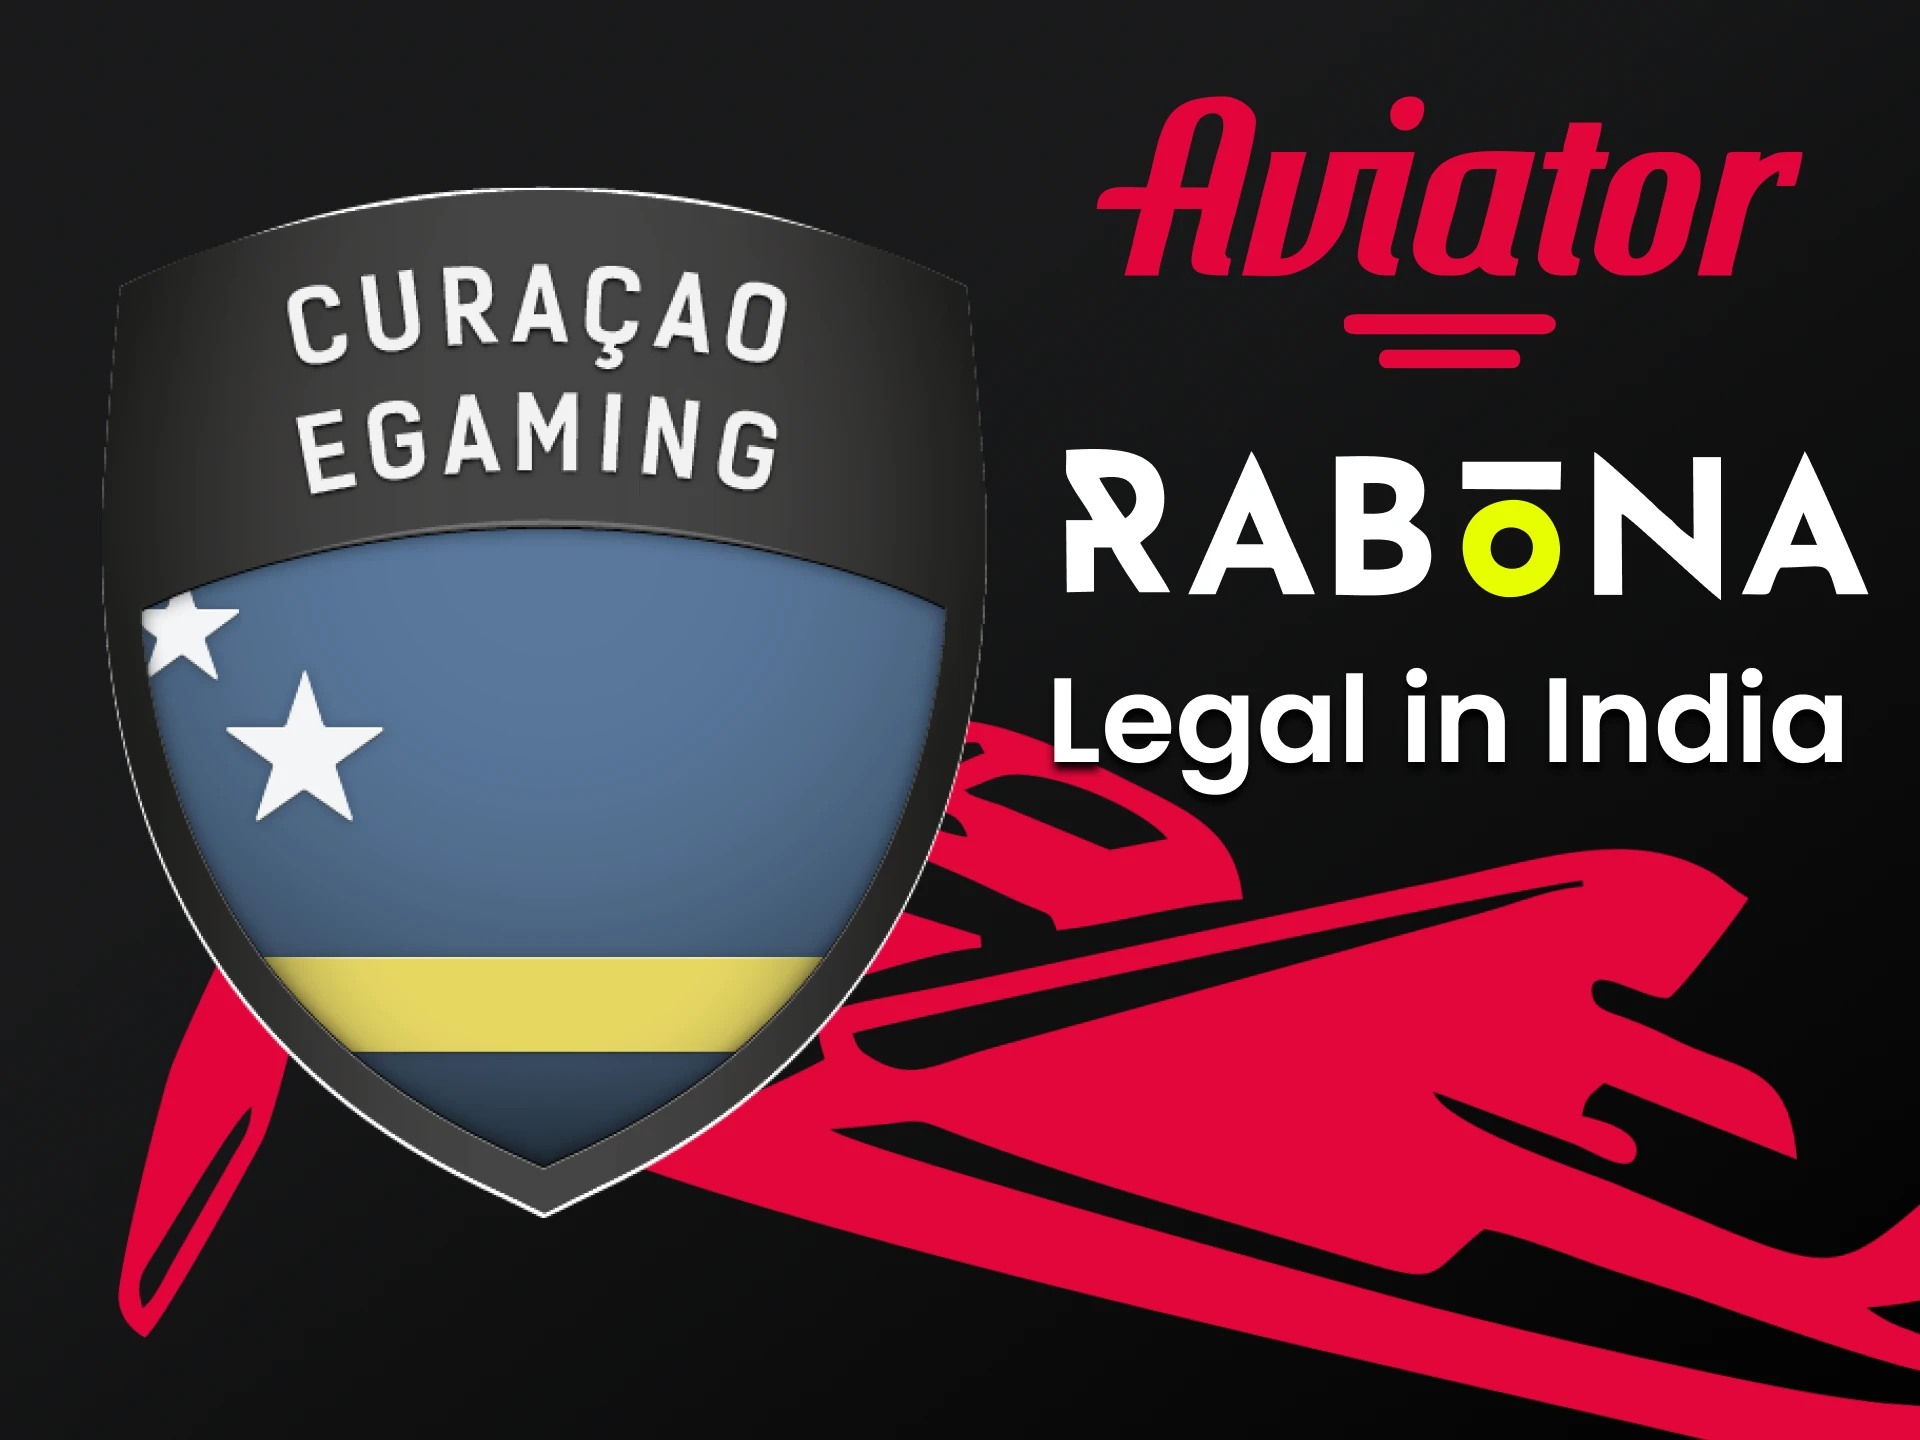 Playing in Aviator on Rabona for users from India is legal.